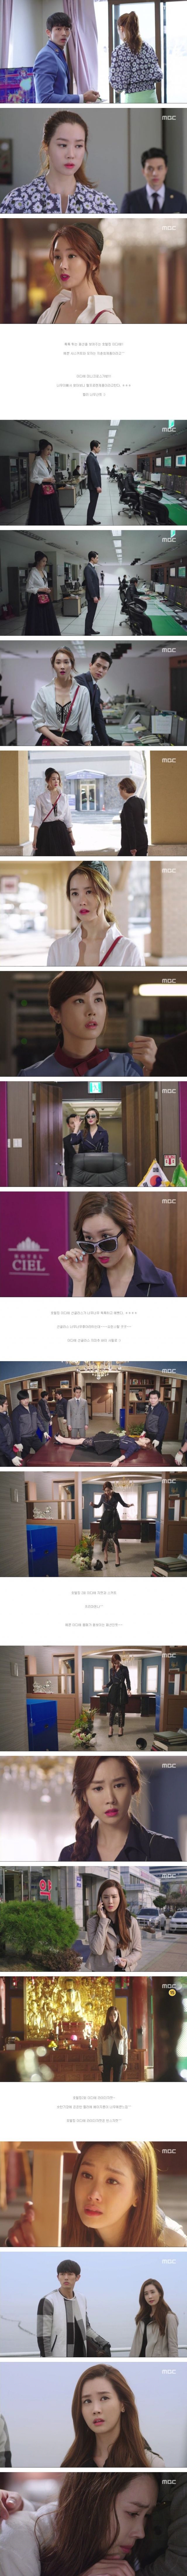 episodes 1 and 2 captures for the Korean drama 'Hotel King'